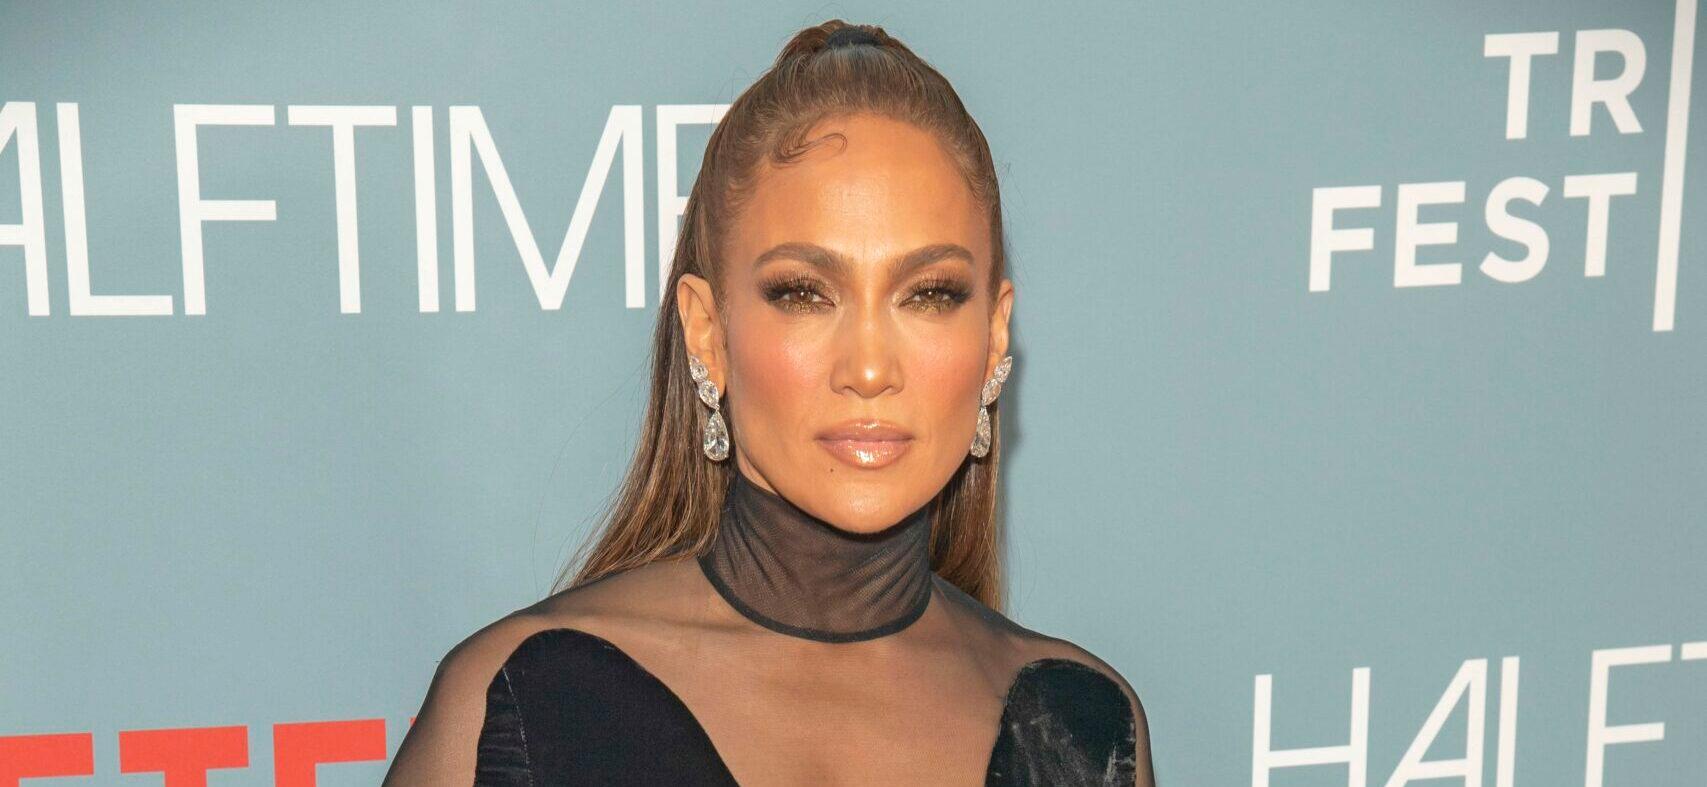 Jennifer Lopez attends the "Halftime" Premiere during the Tribeca Film Festival Opening Night at United Palace on June 08 2022 in New York City.